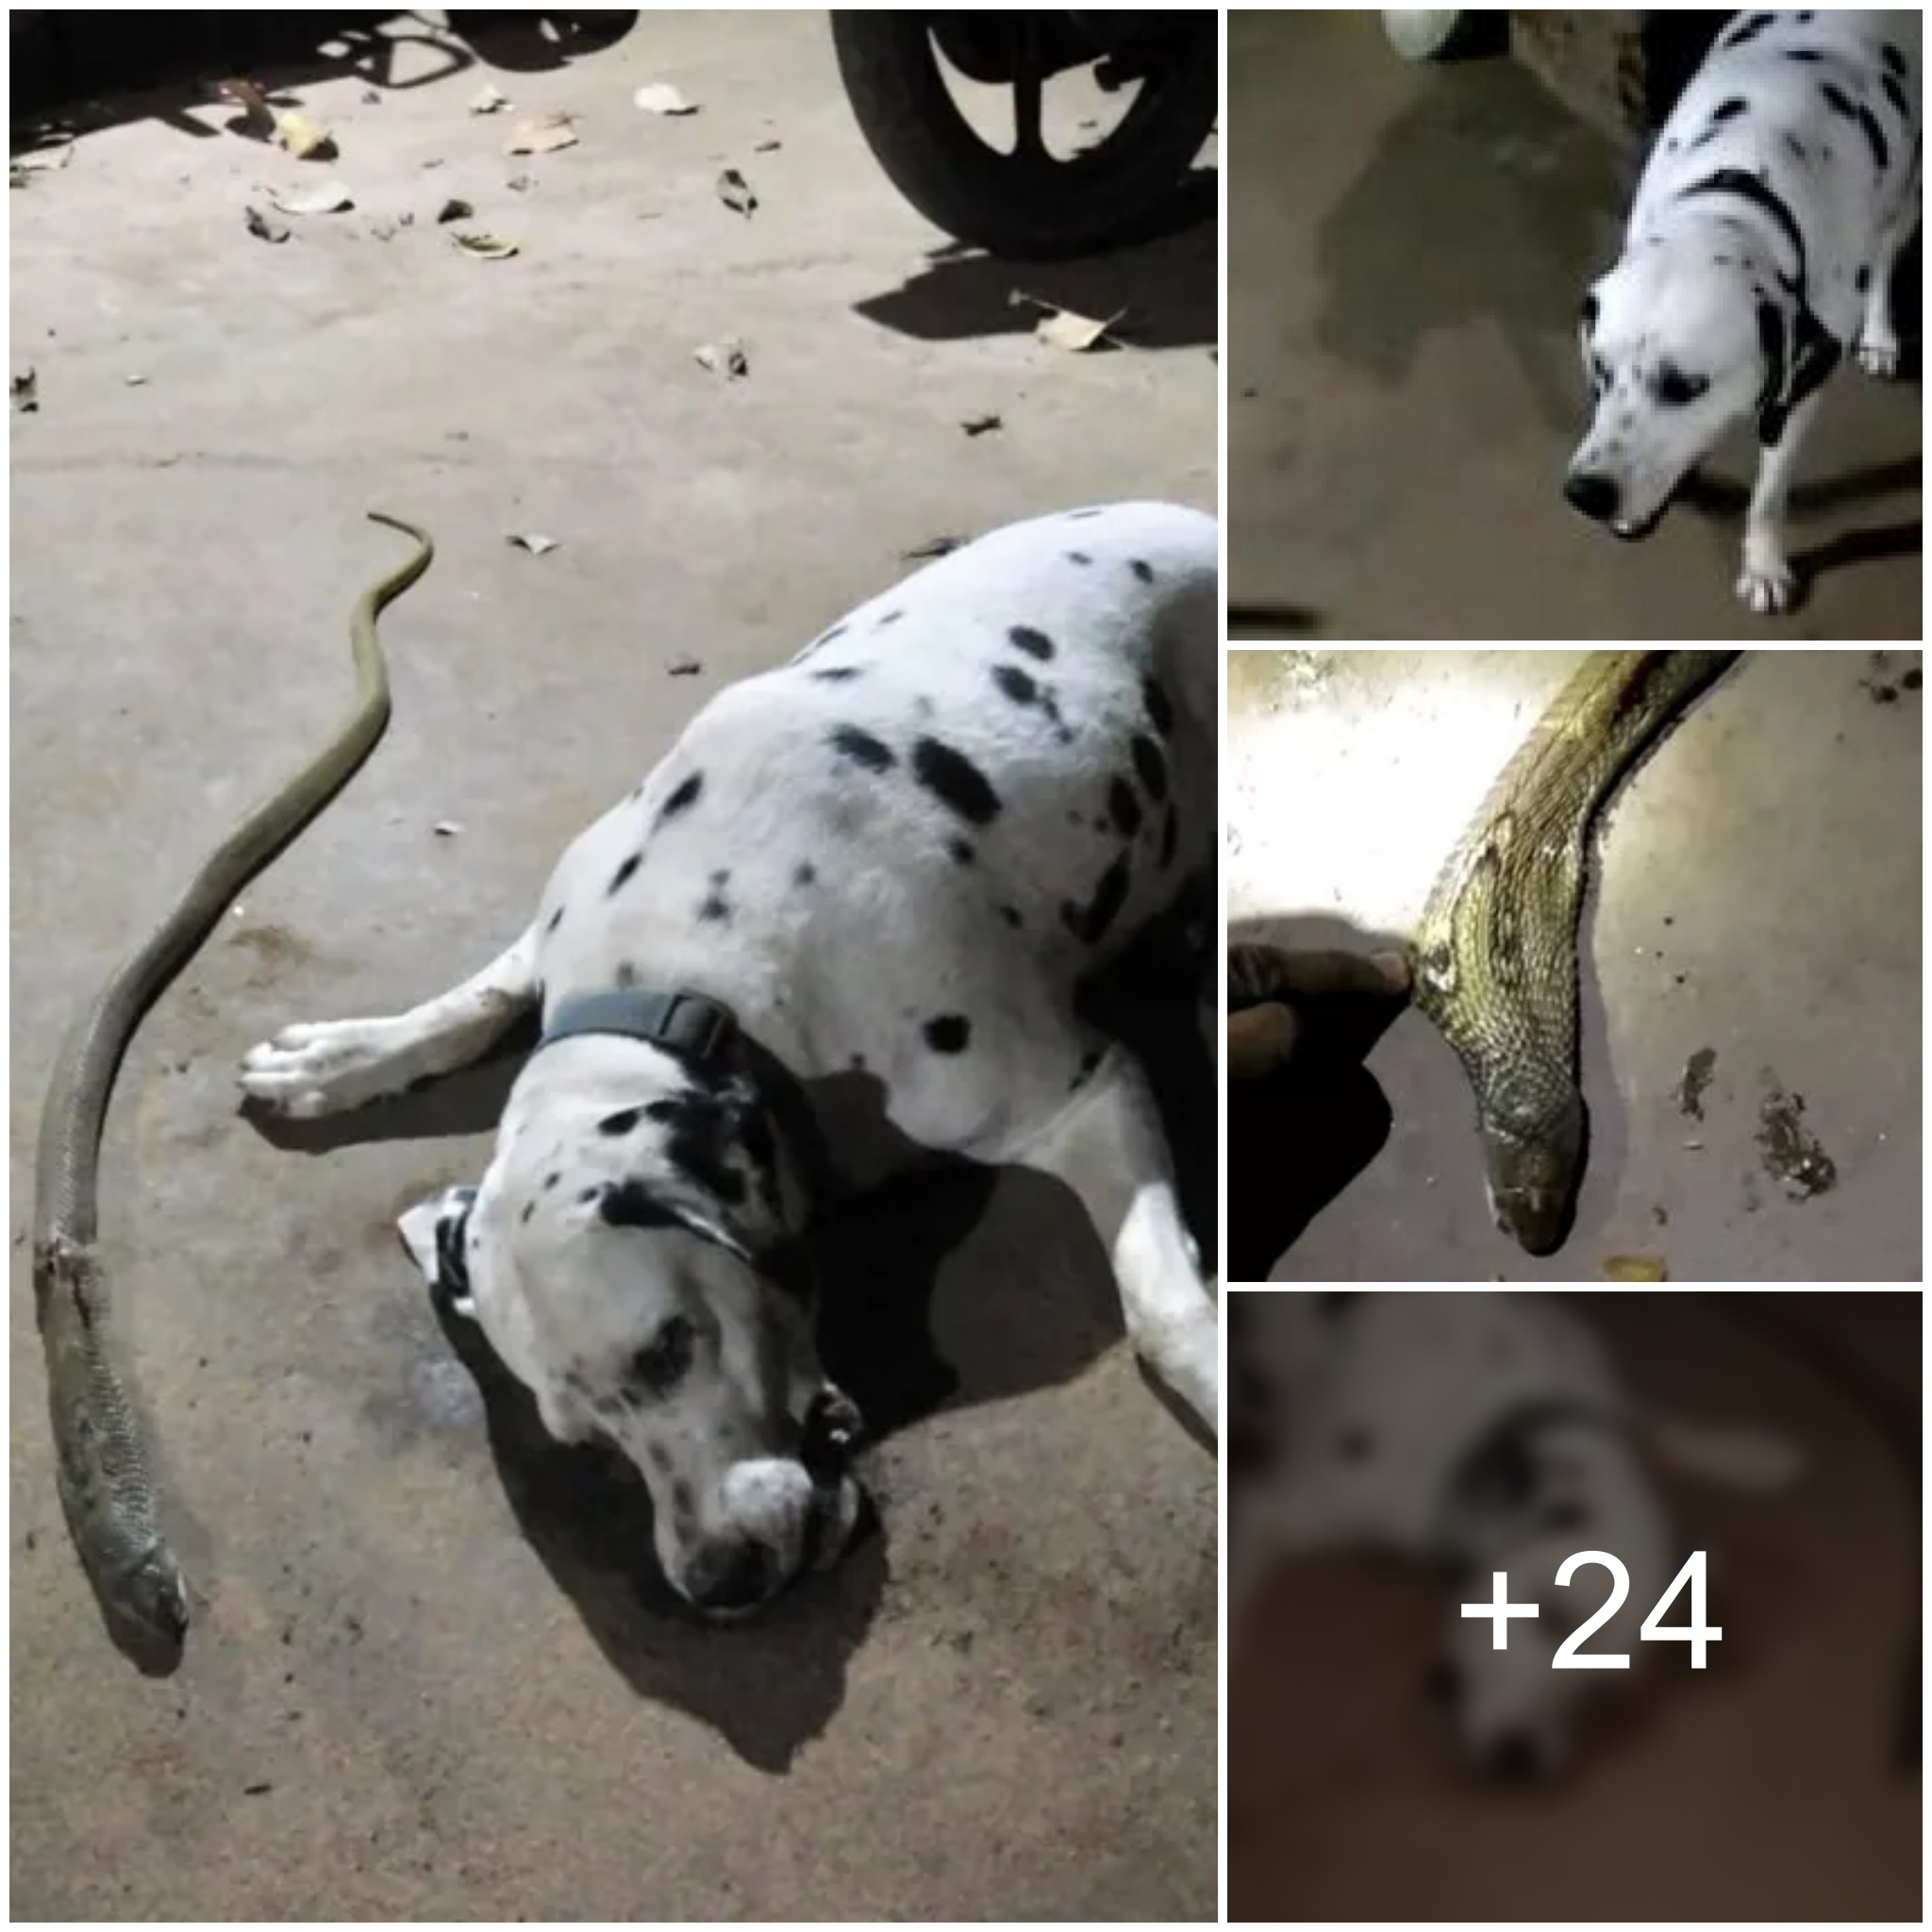 While protecting their home, a courageous dog in India sacrifices its life to prevent its owners from being bitten by a cobra. This heroic Dalmatian sacrifices itself.